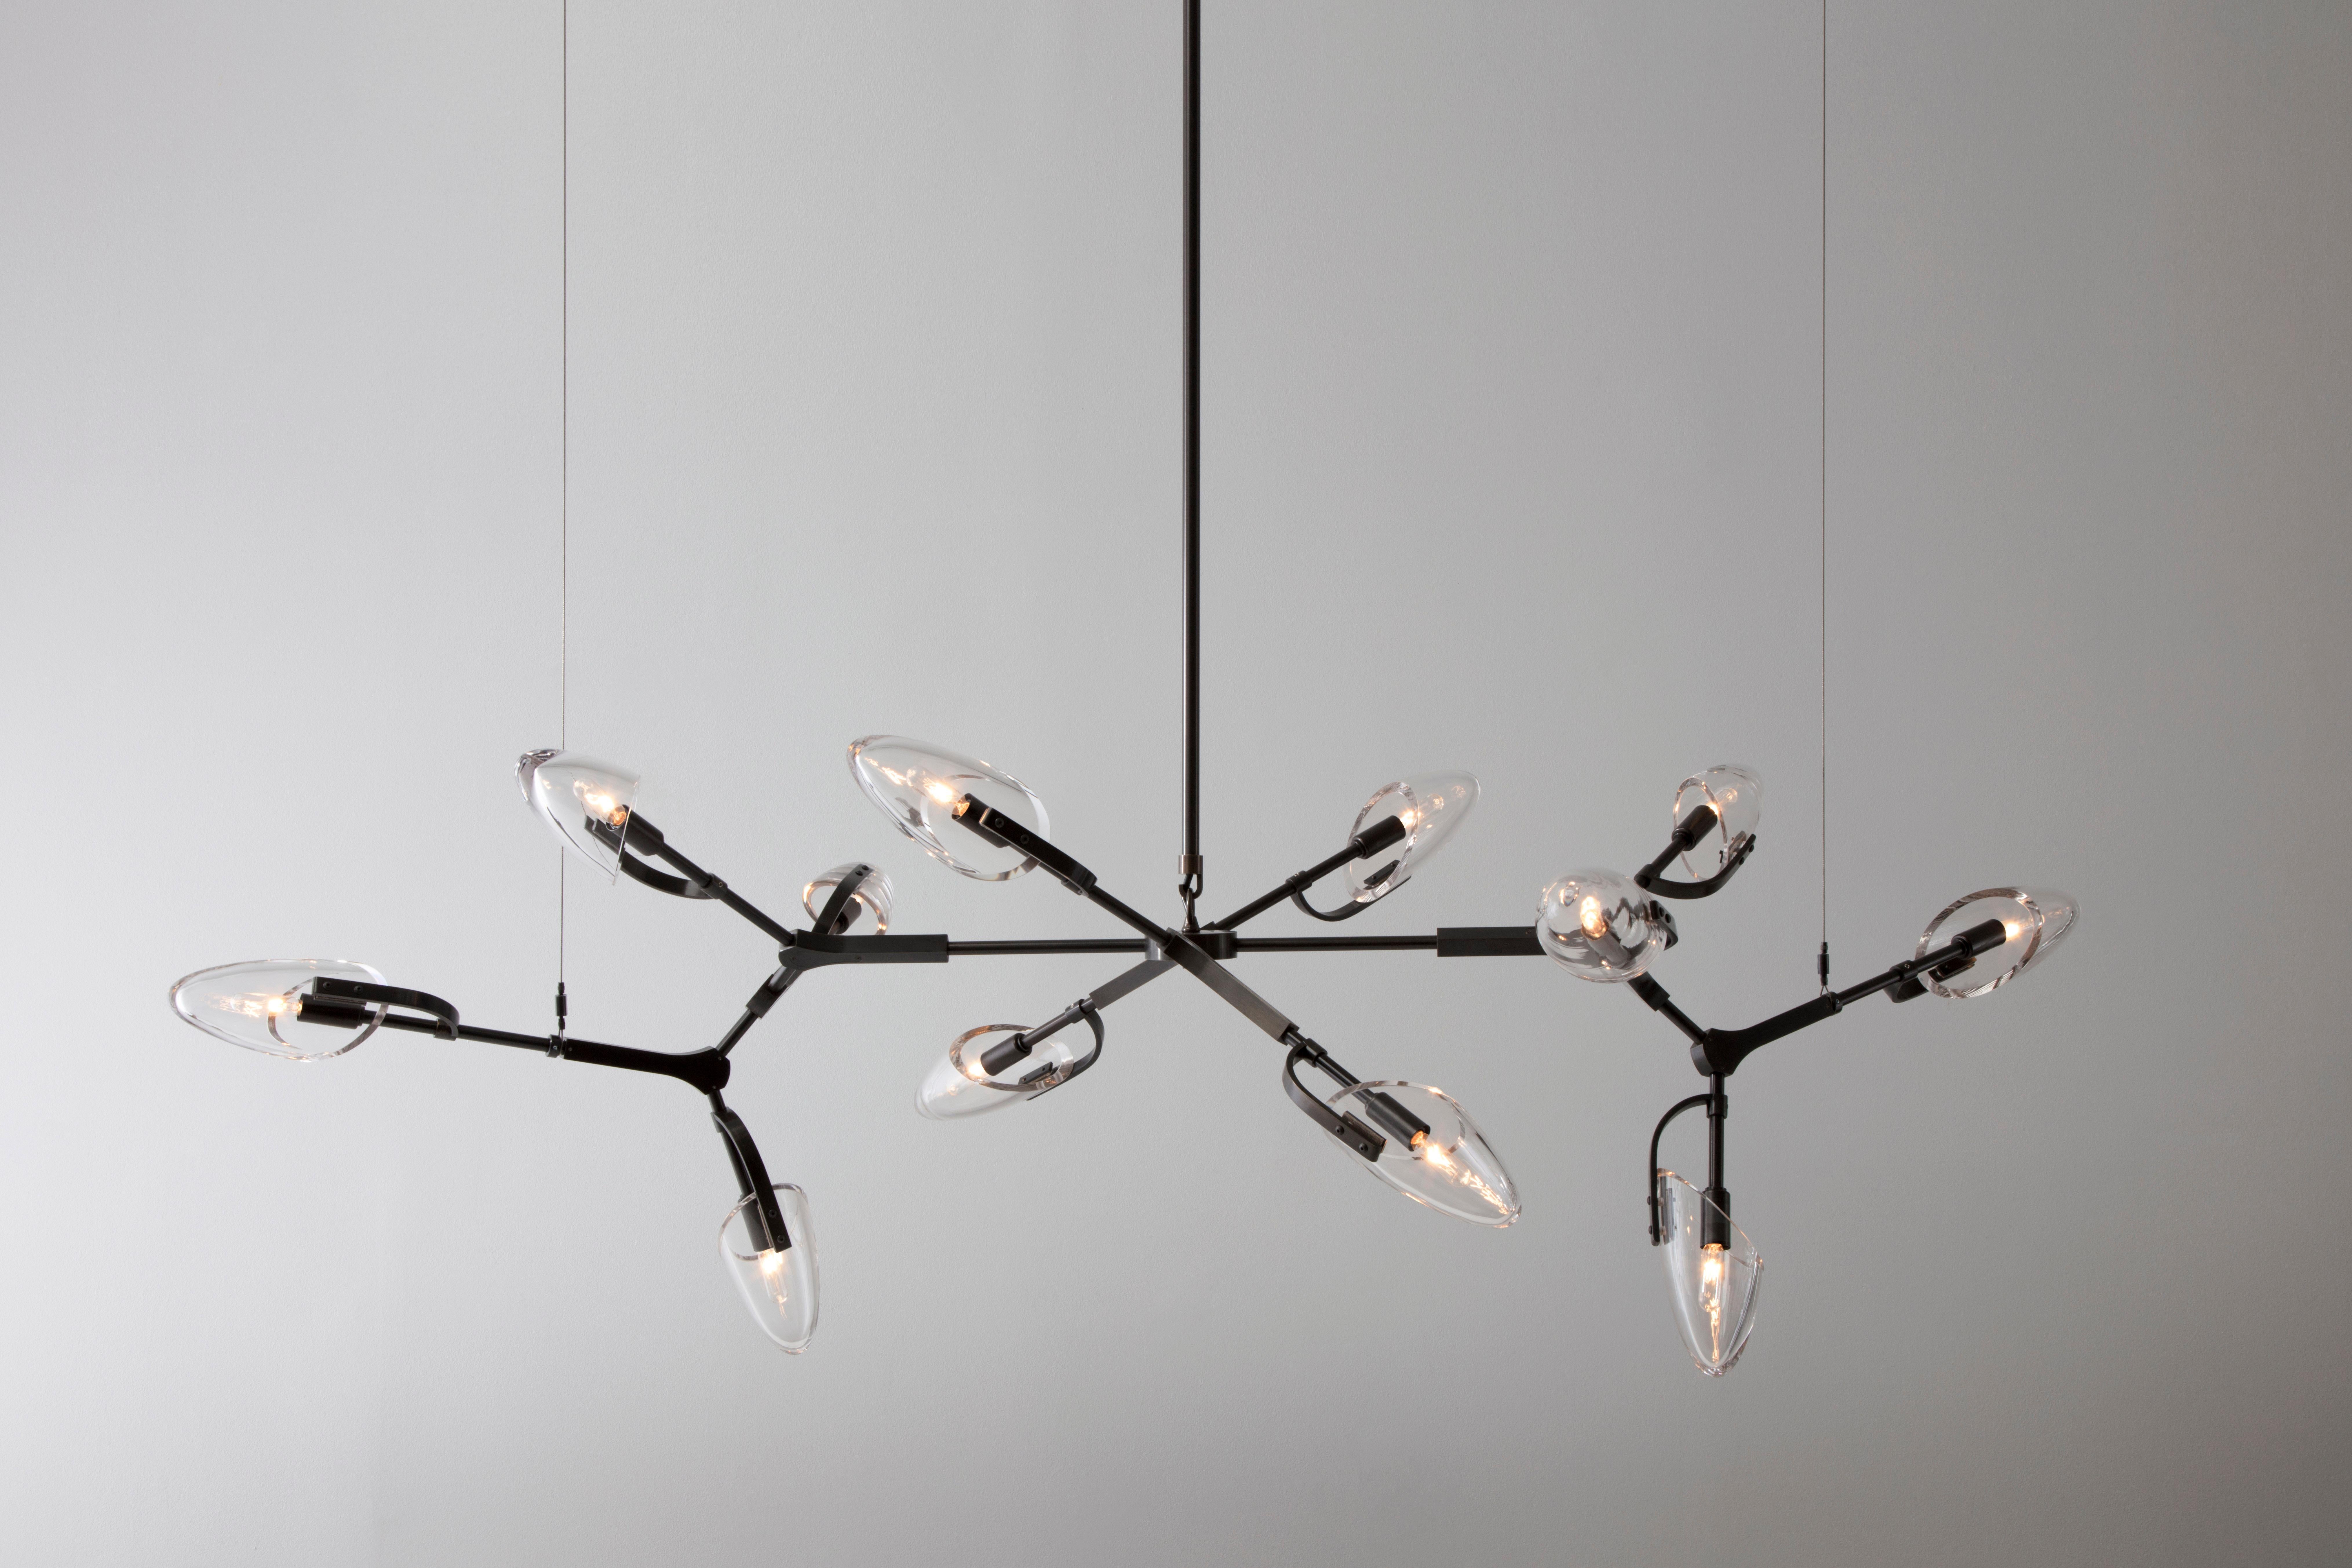 Kinesis chandelier is a modular lighting system featuring blown glass diffusers which are interconnected by solid brass components. The resulting fixture is a lithe and sculptural centerpiece, which is unique from every angle. This listing features